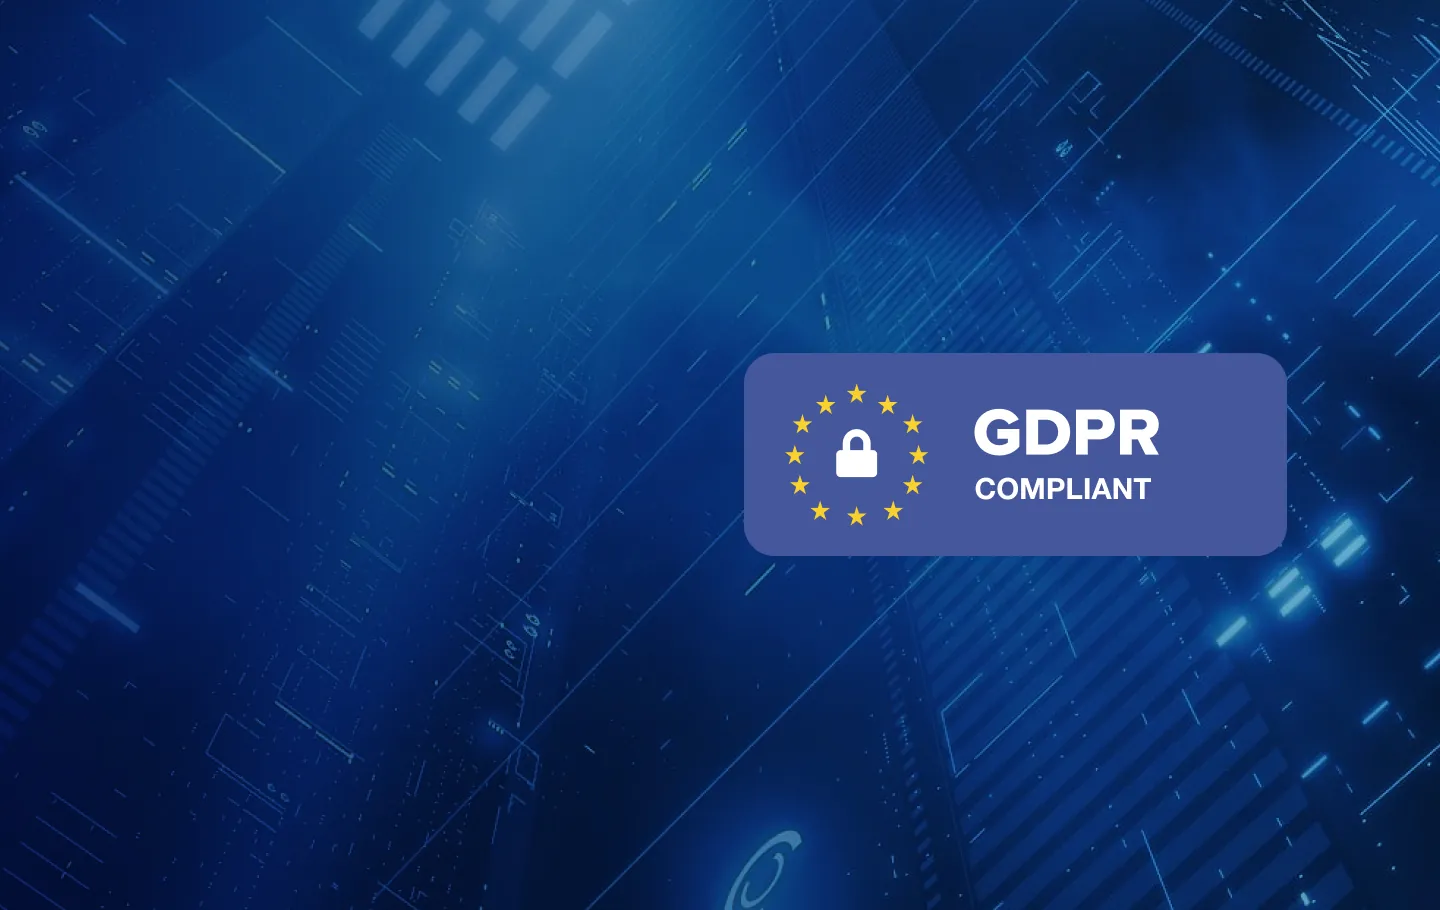 GDPR Complient  and a lock on a blue background